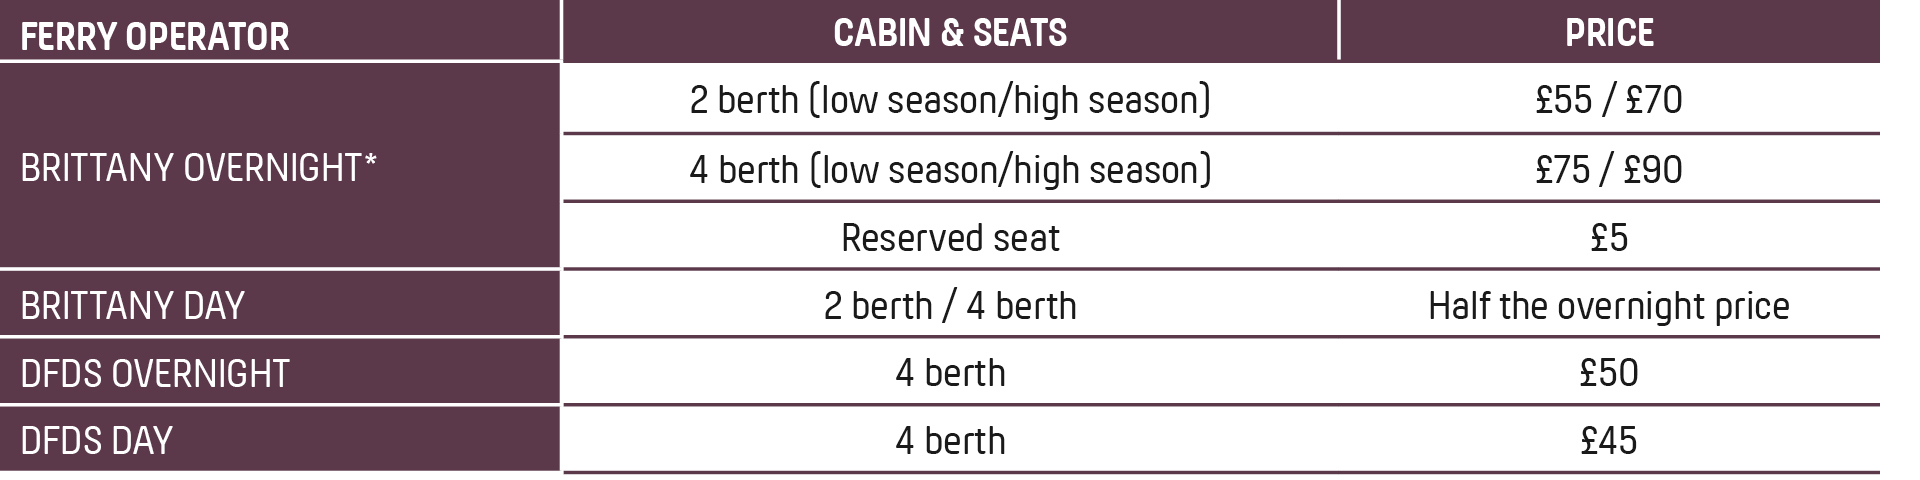 Cabin prices 2023